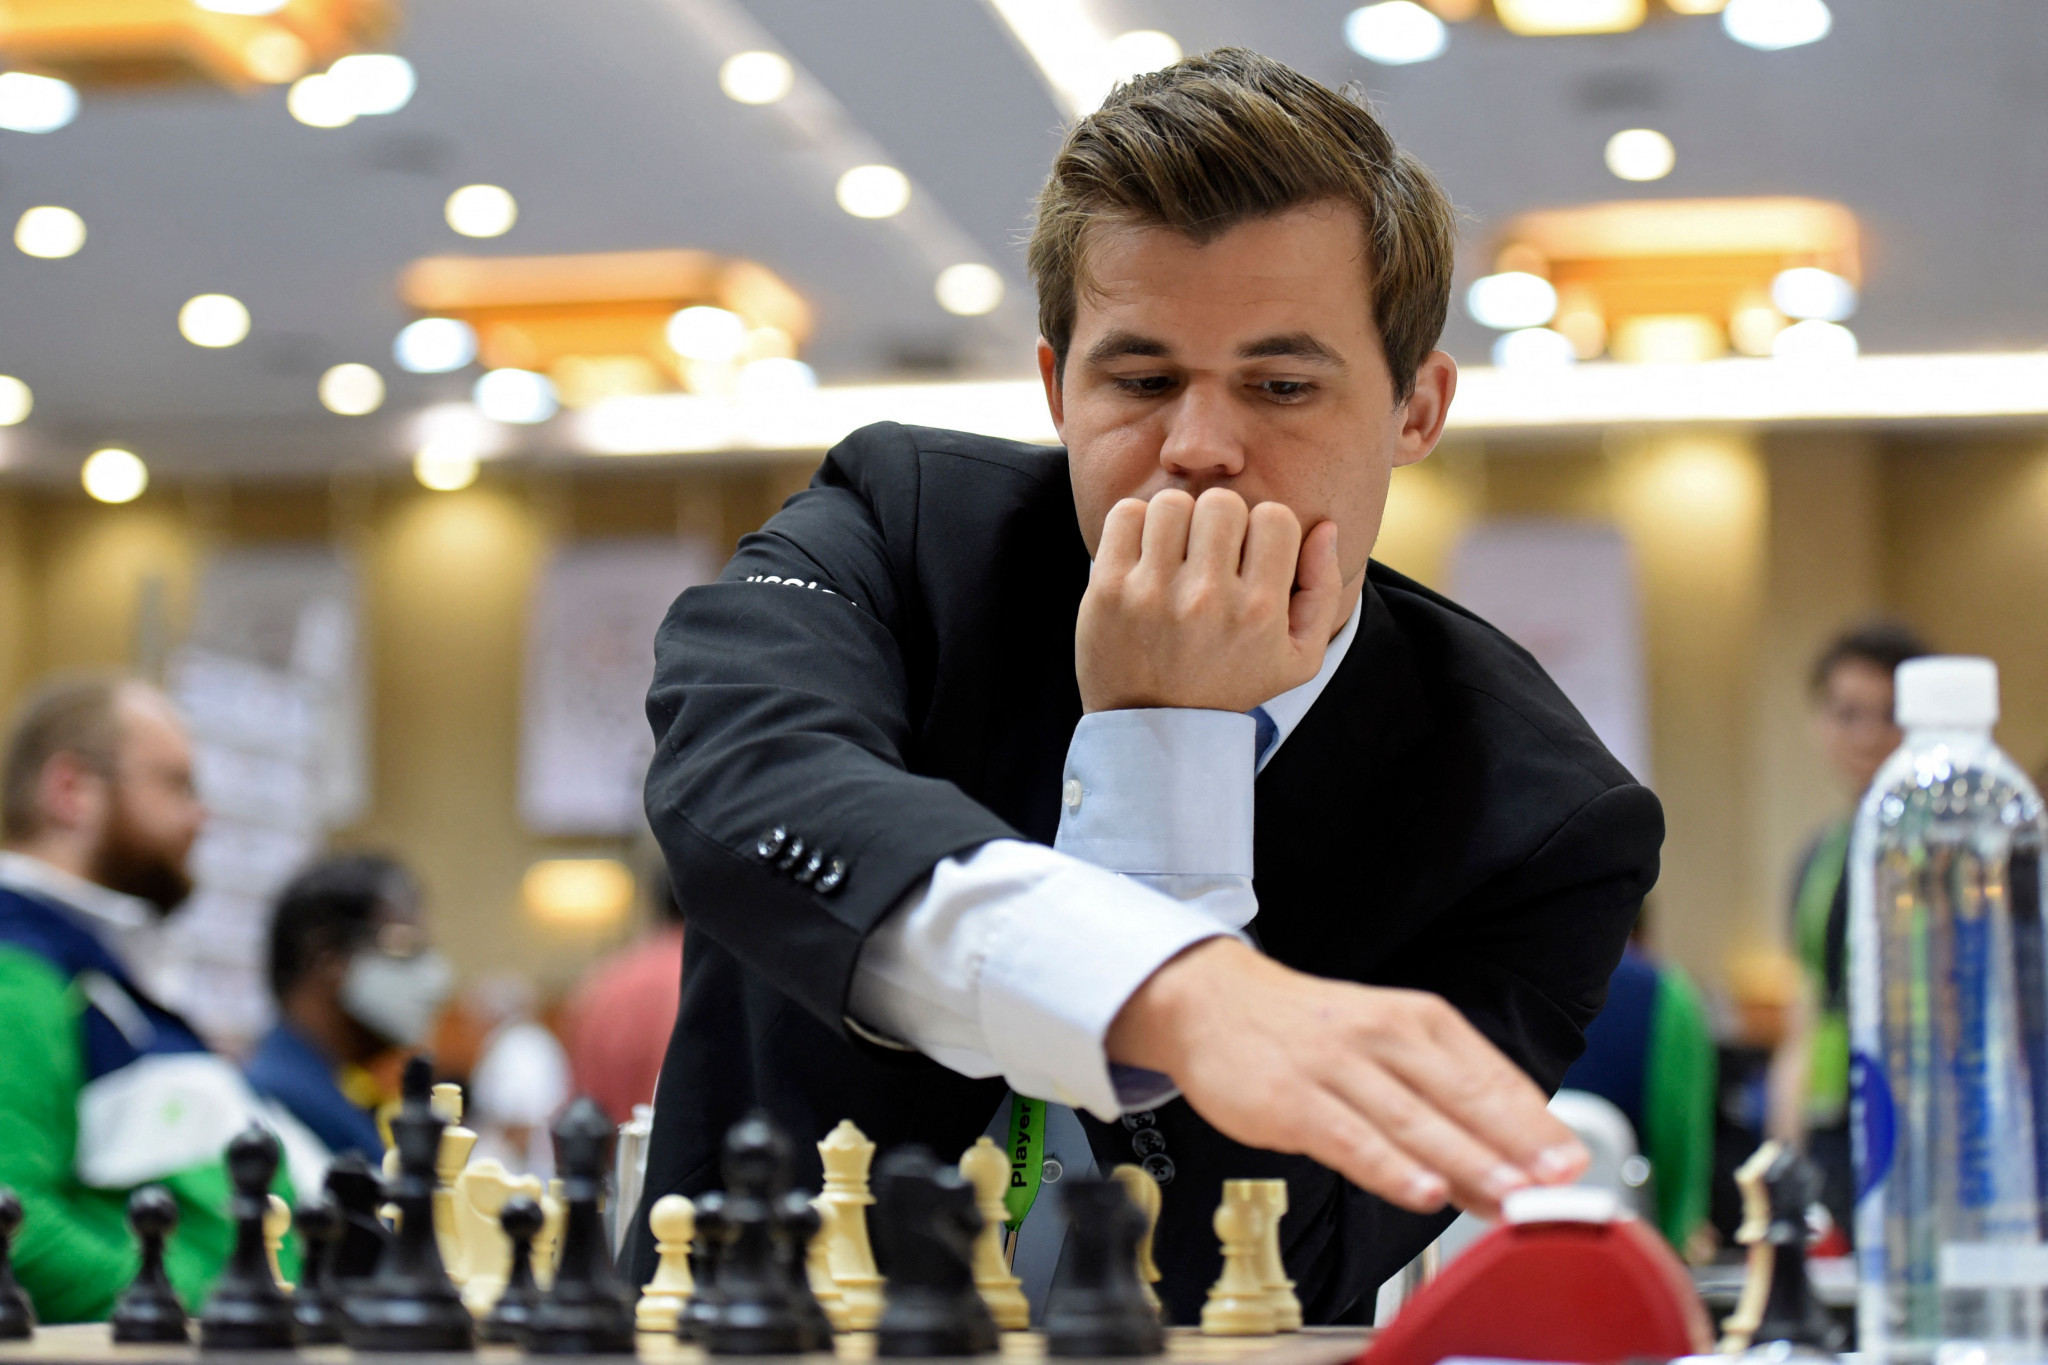 World champion Carlsen withdraws from chess' Sinquefield Cup after surprise defeat